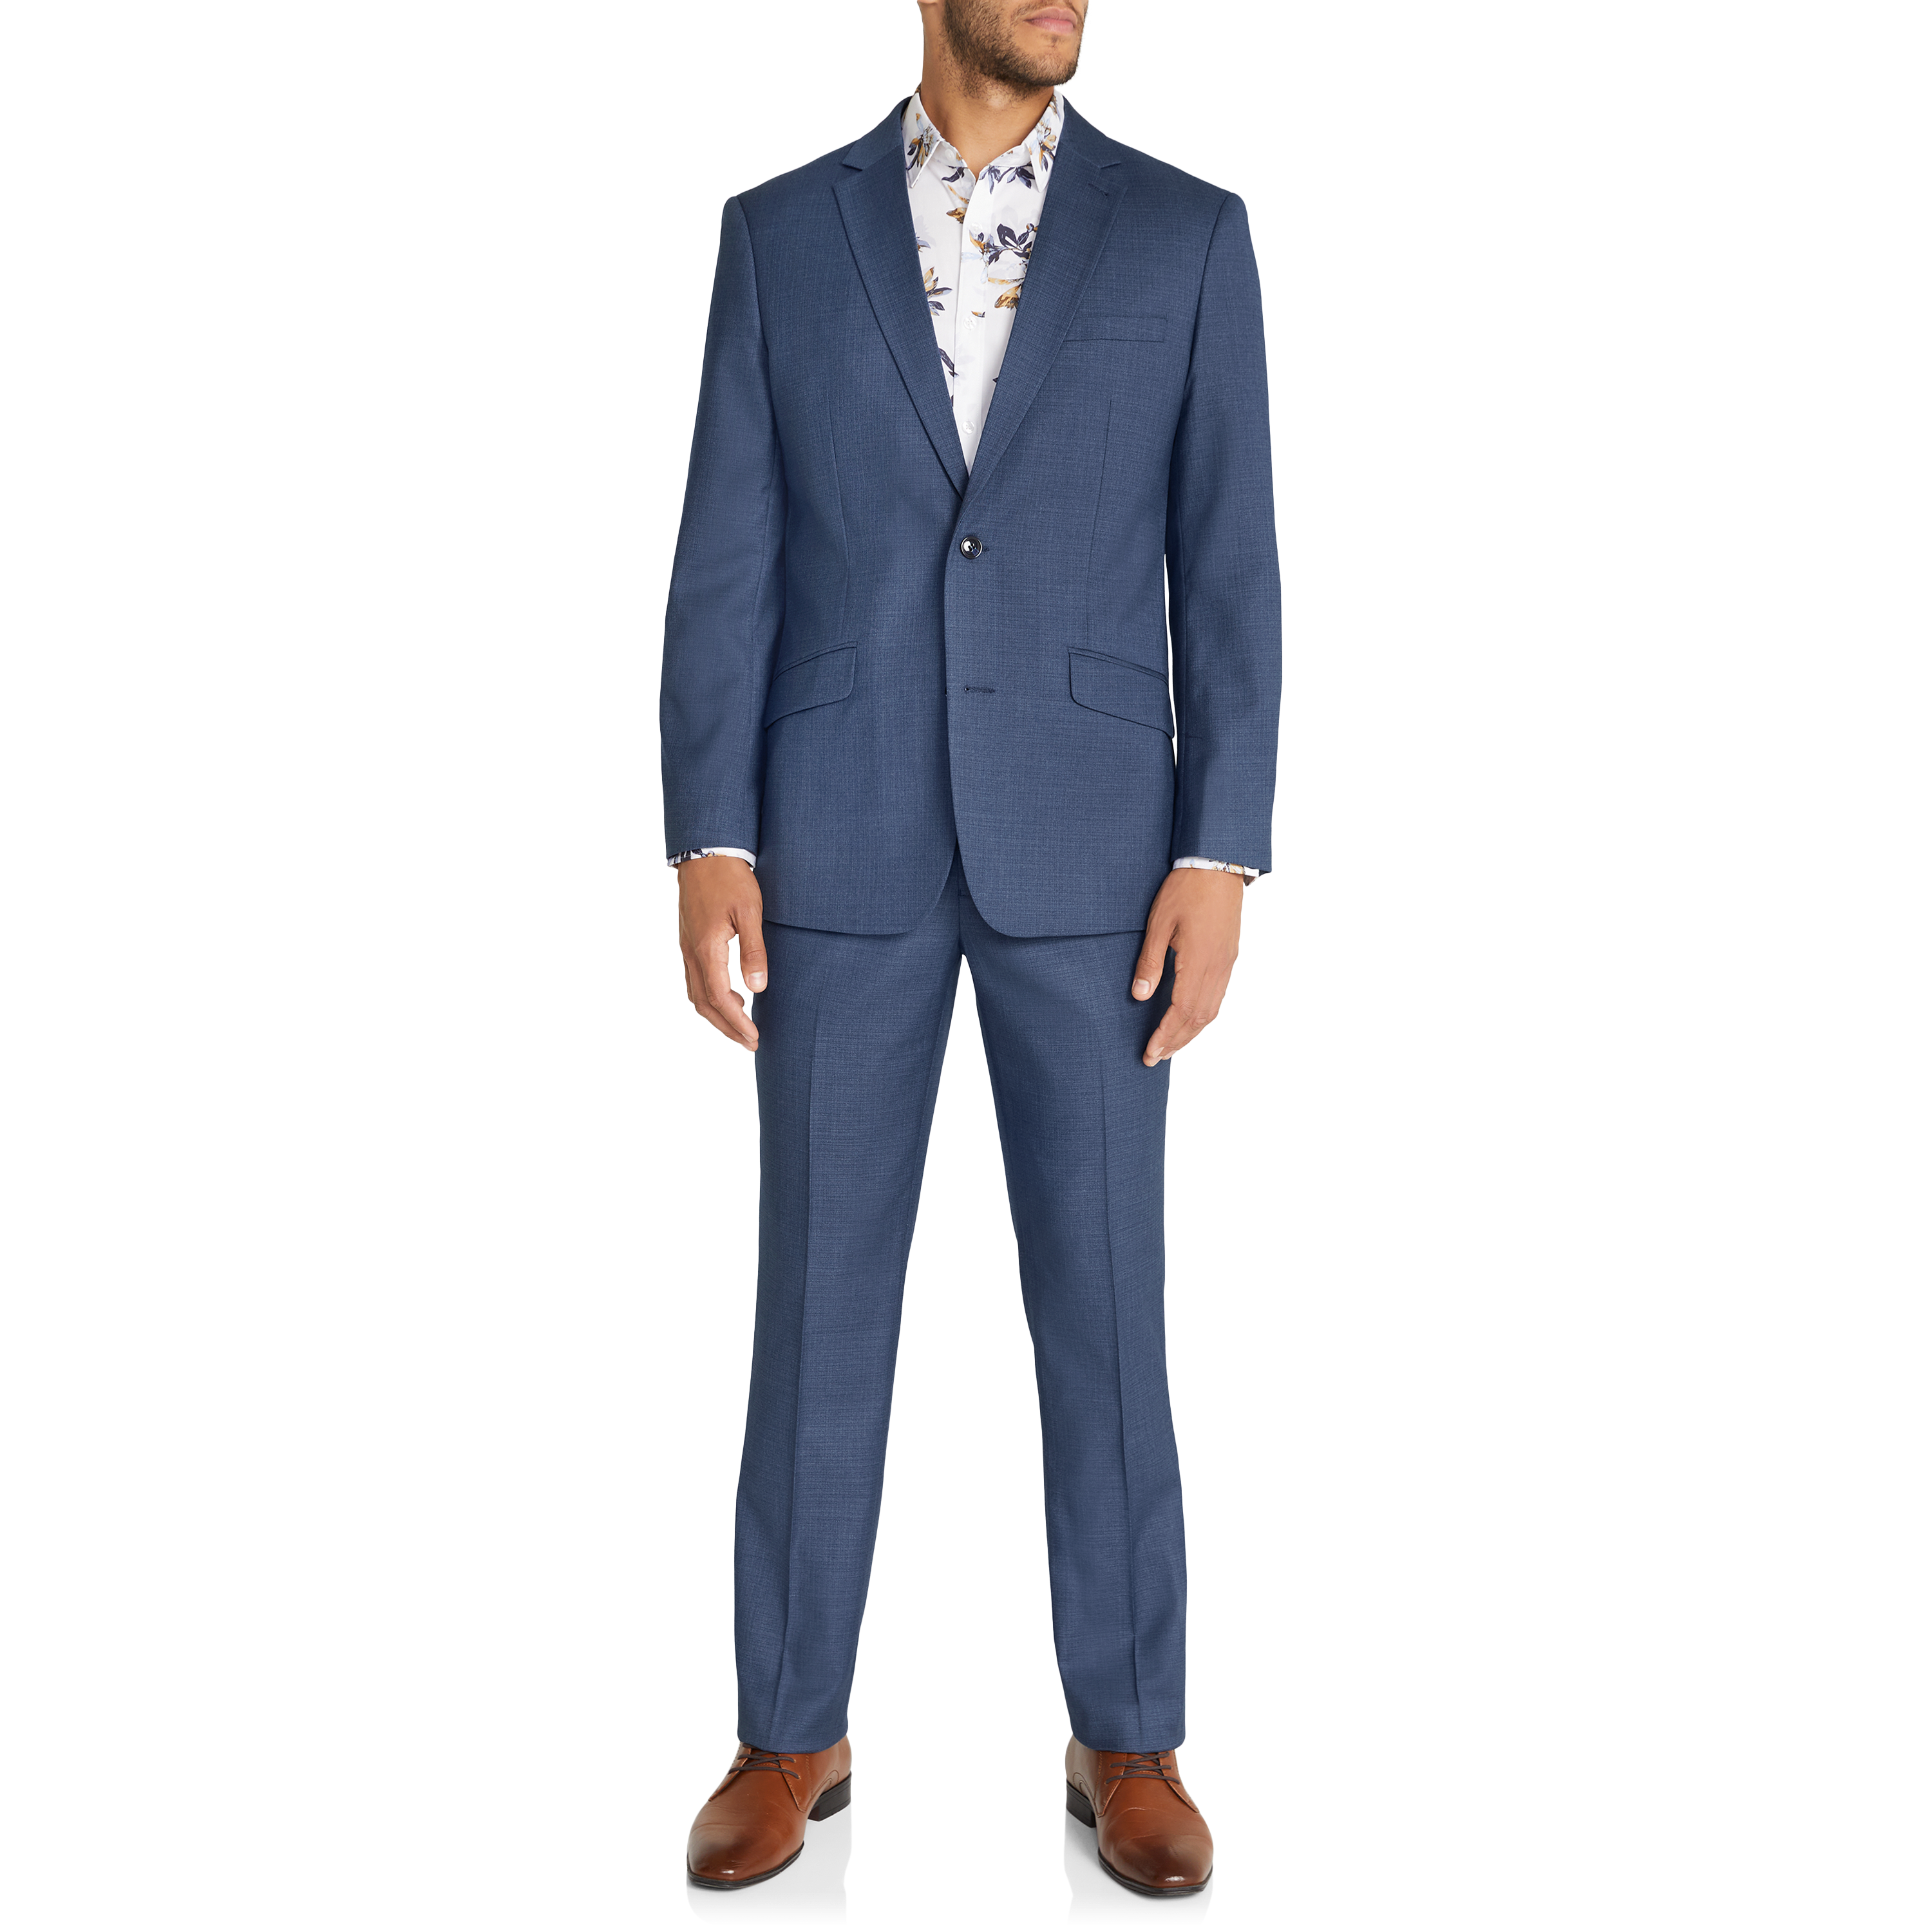 KCT Menswear - Slim Royal Blue Tuxedo with Black Lapels and Slim Black pants  - Perfect for Weddings, Prom, and Red Carpet Events